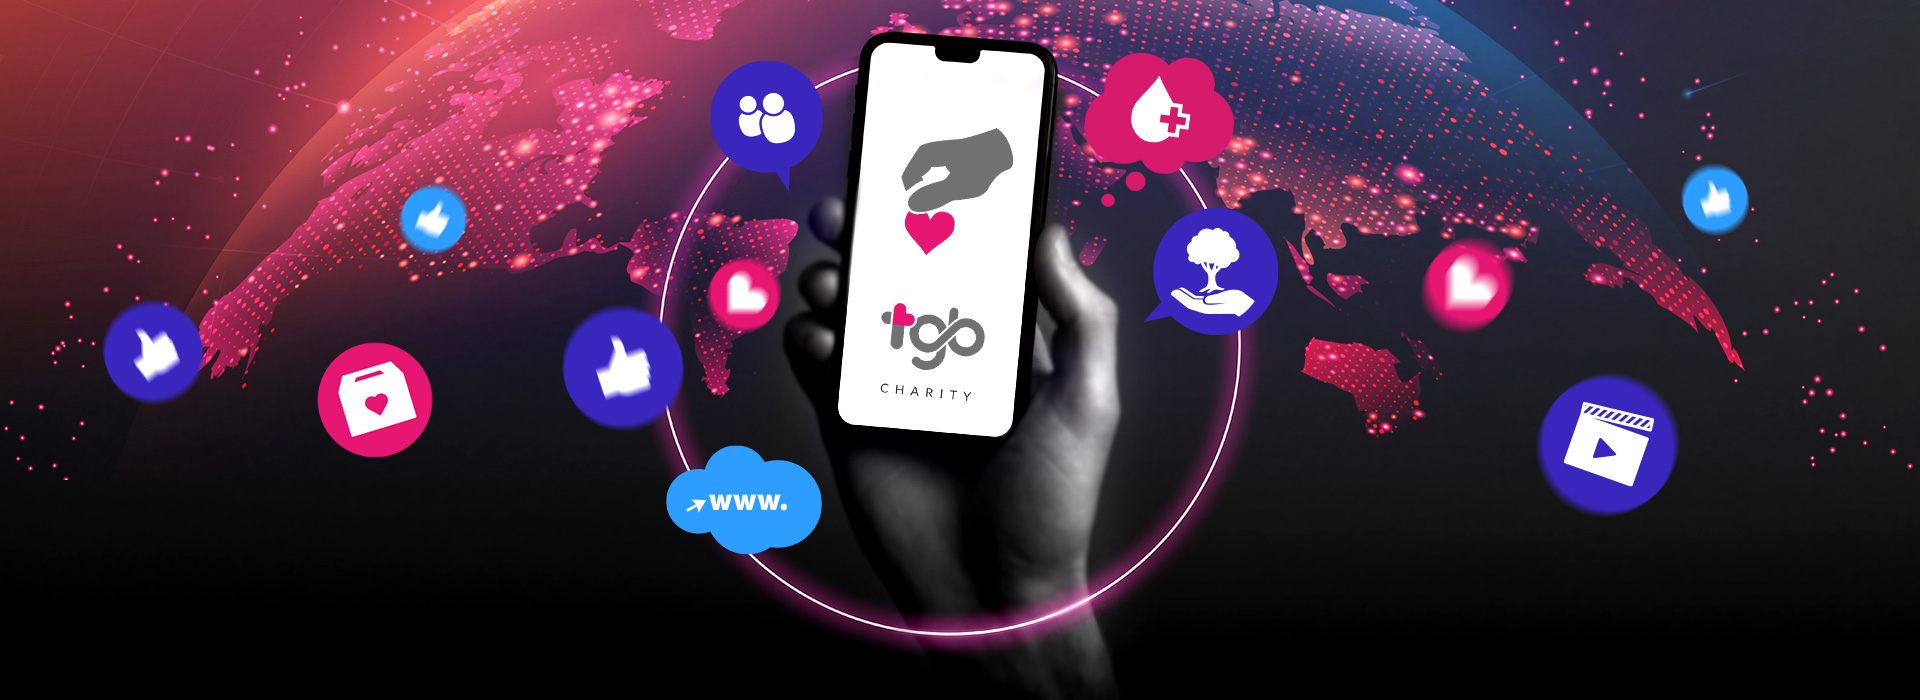 It all starts with your smartphone - TGB Charity